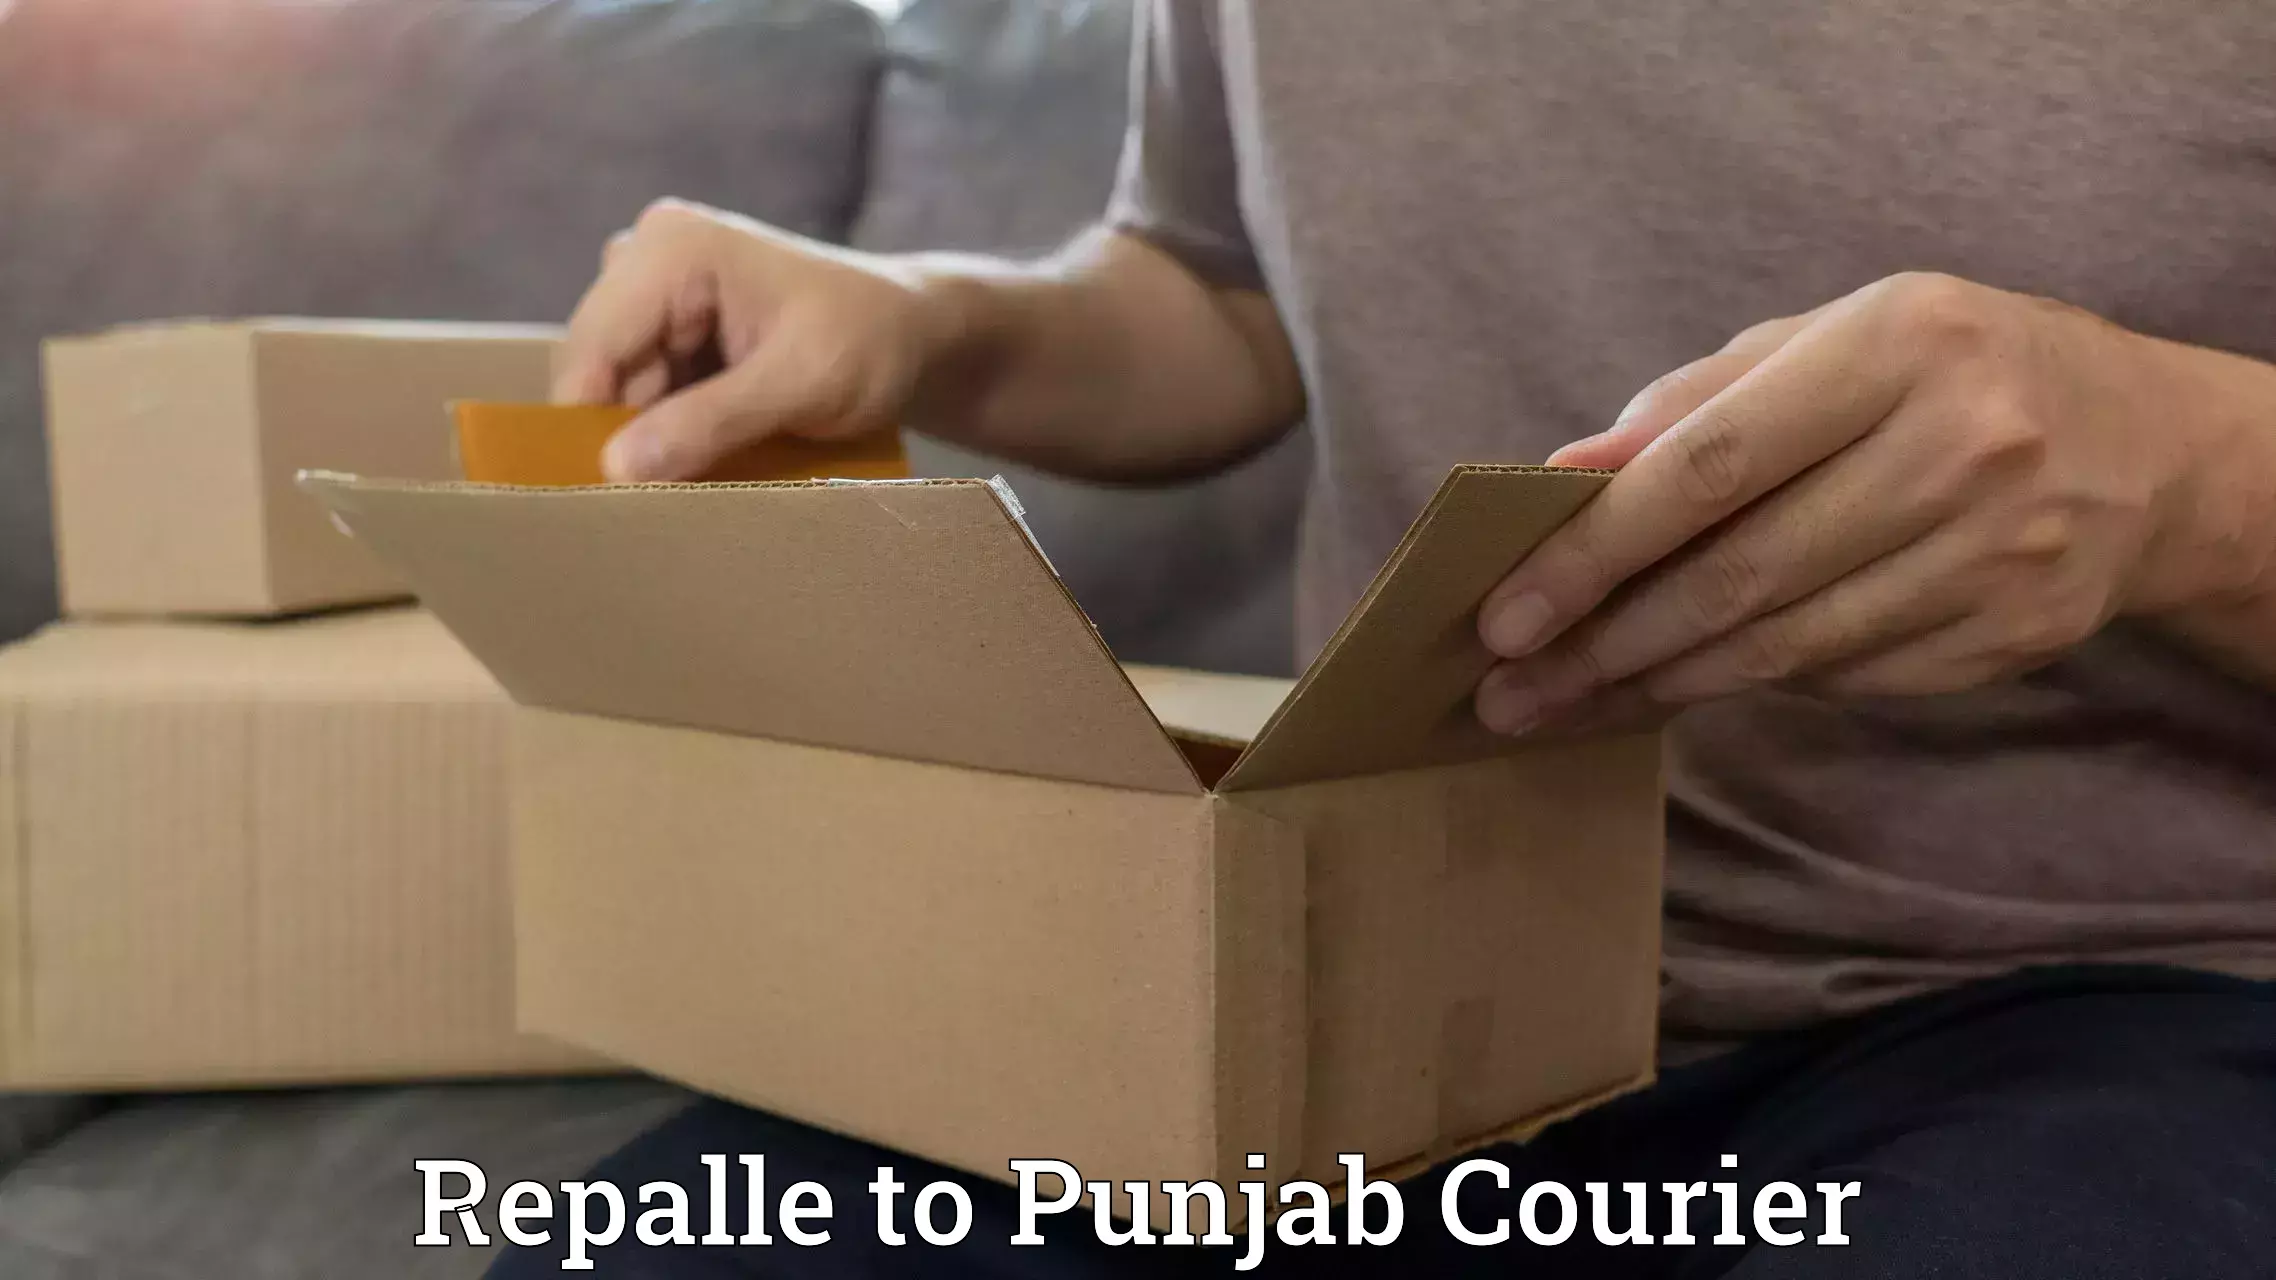 International shipping in Repalle to Central University of Punjab Bathinda